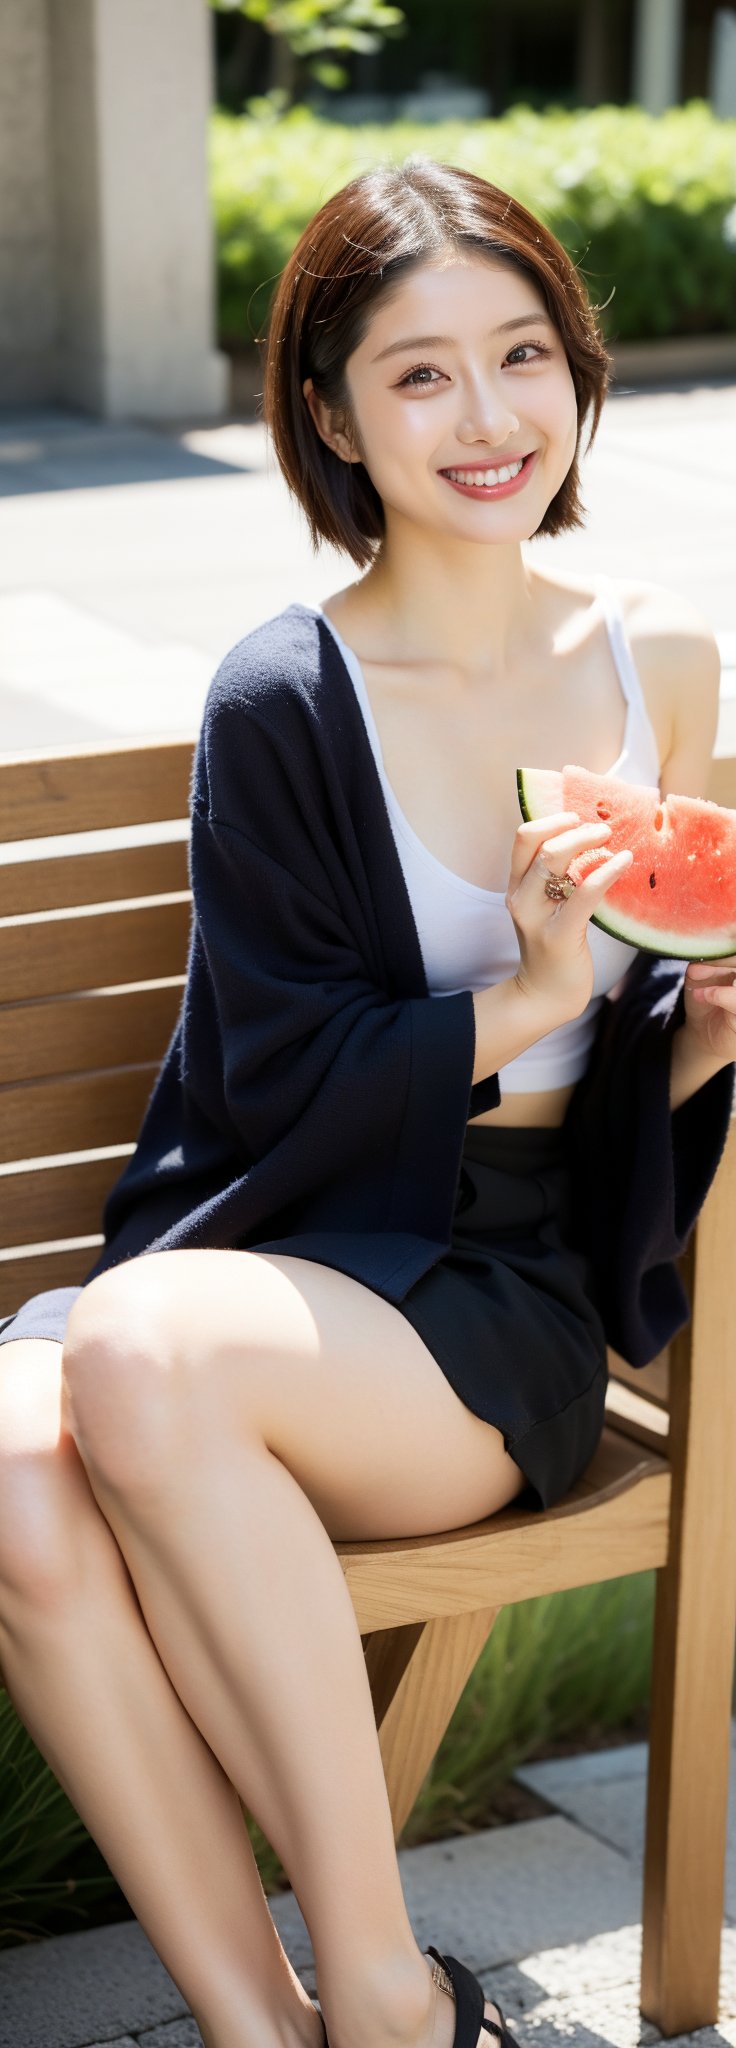 8k,best quality,masterpiece,ultra high res,portrait,beautiful,kawaii,dark hair,happy smile,bob,open clothes,from front,sweat_drops,
in the down town,
eating watermelon,
sitting in the long chair in the courtyard in Kyoto,perfect light ,Japanese ,idol